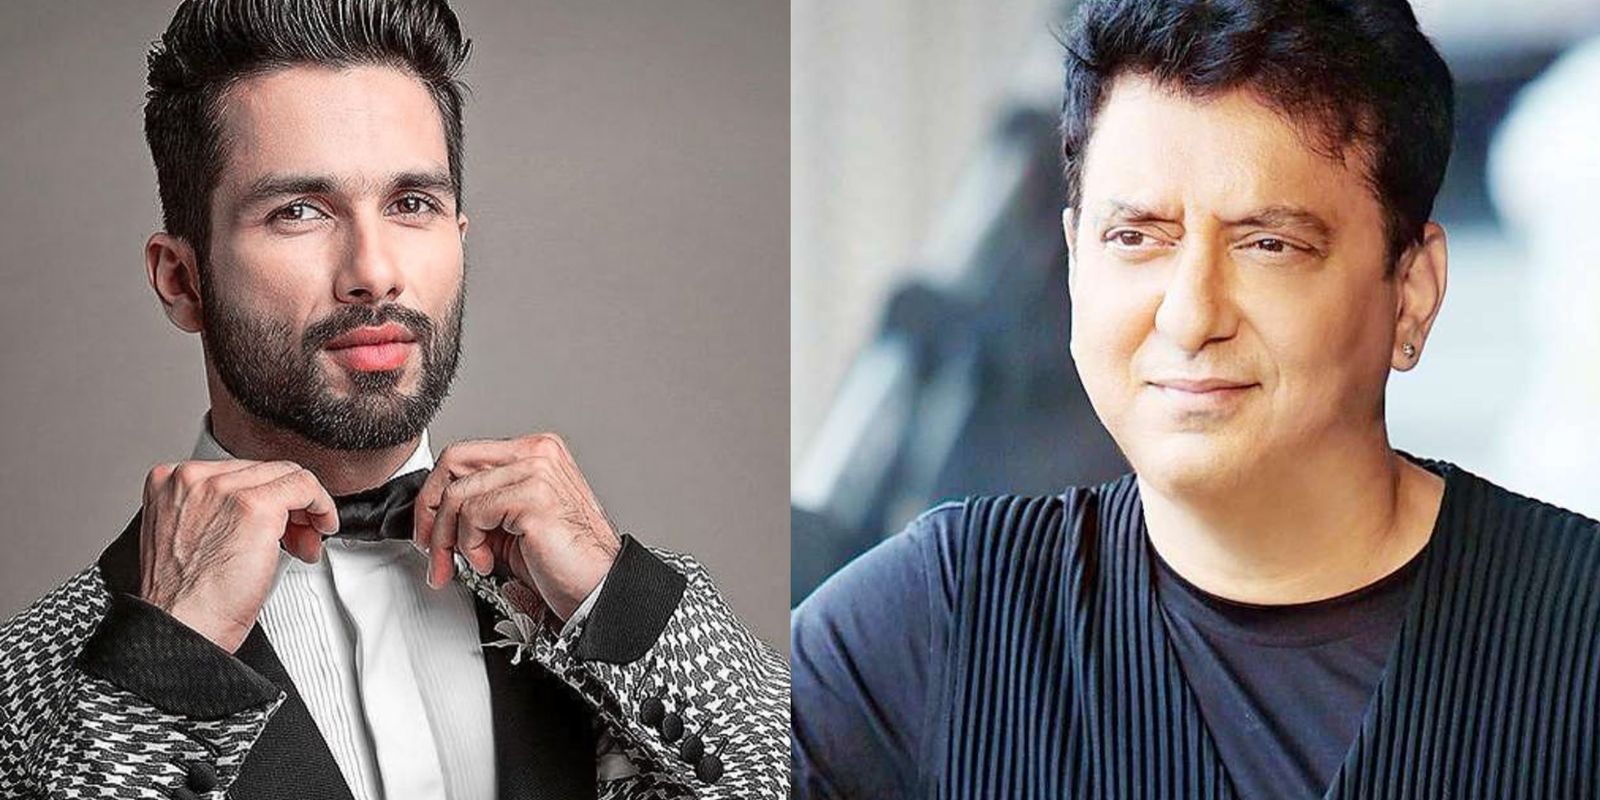 Shahid Kapoor To Feature In Sajid Nadiadwala’s Upcoming Social Drama? Here’s What We Know